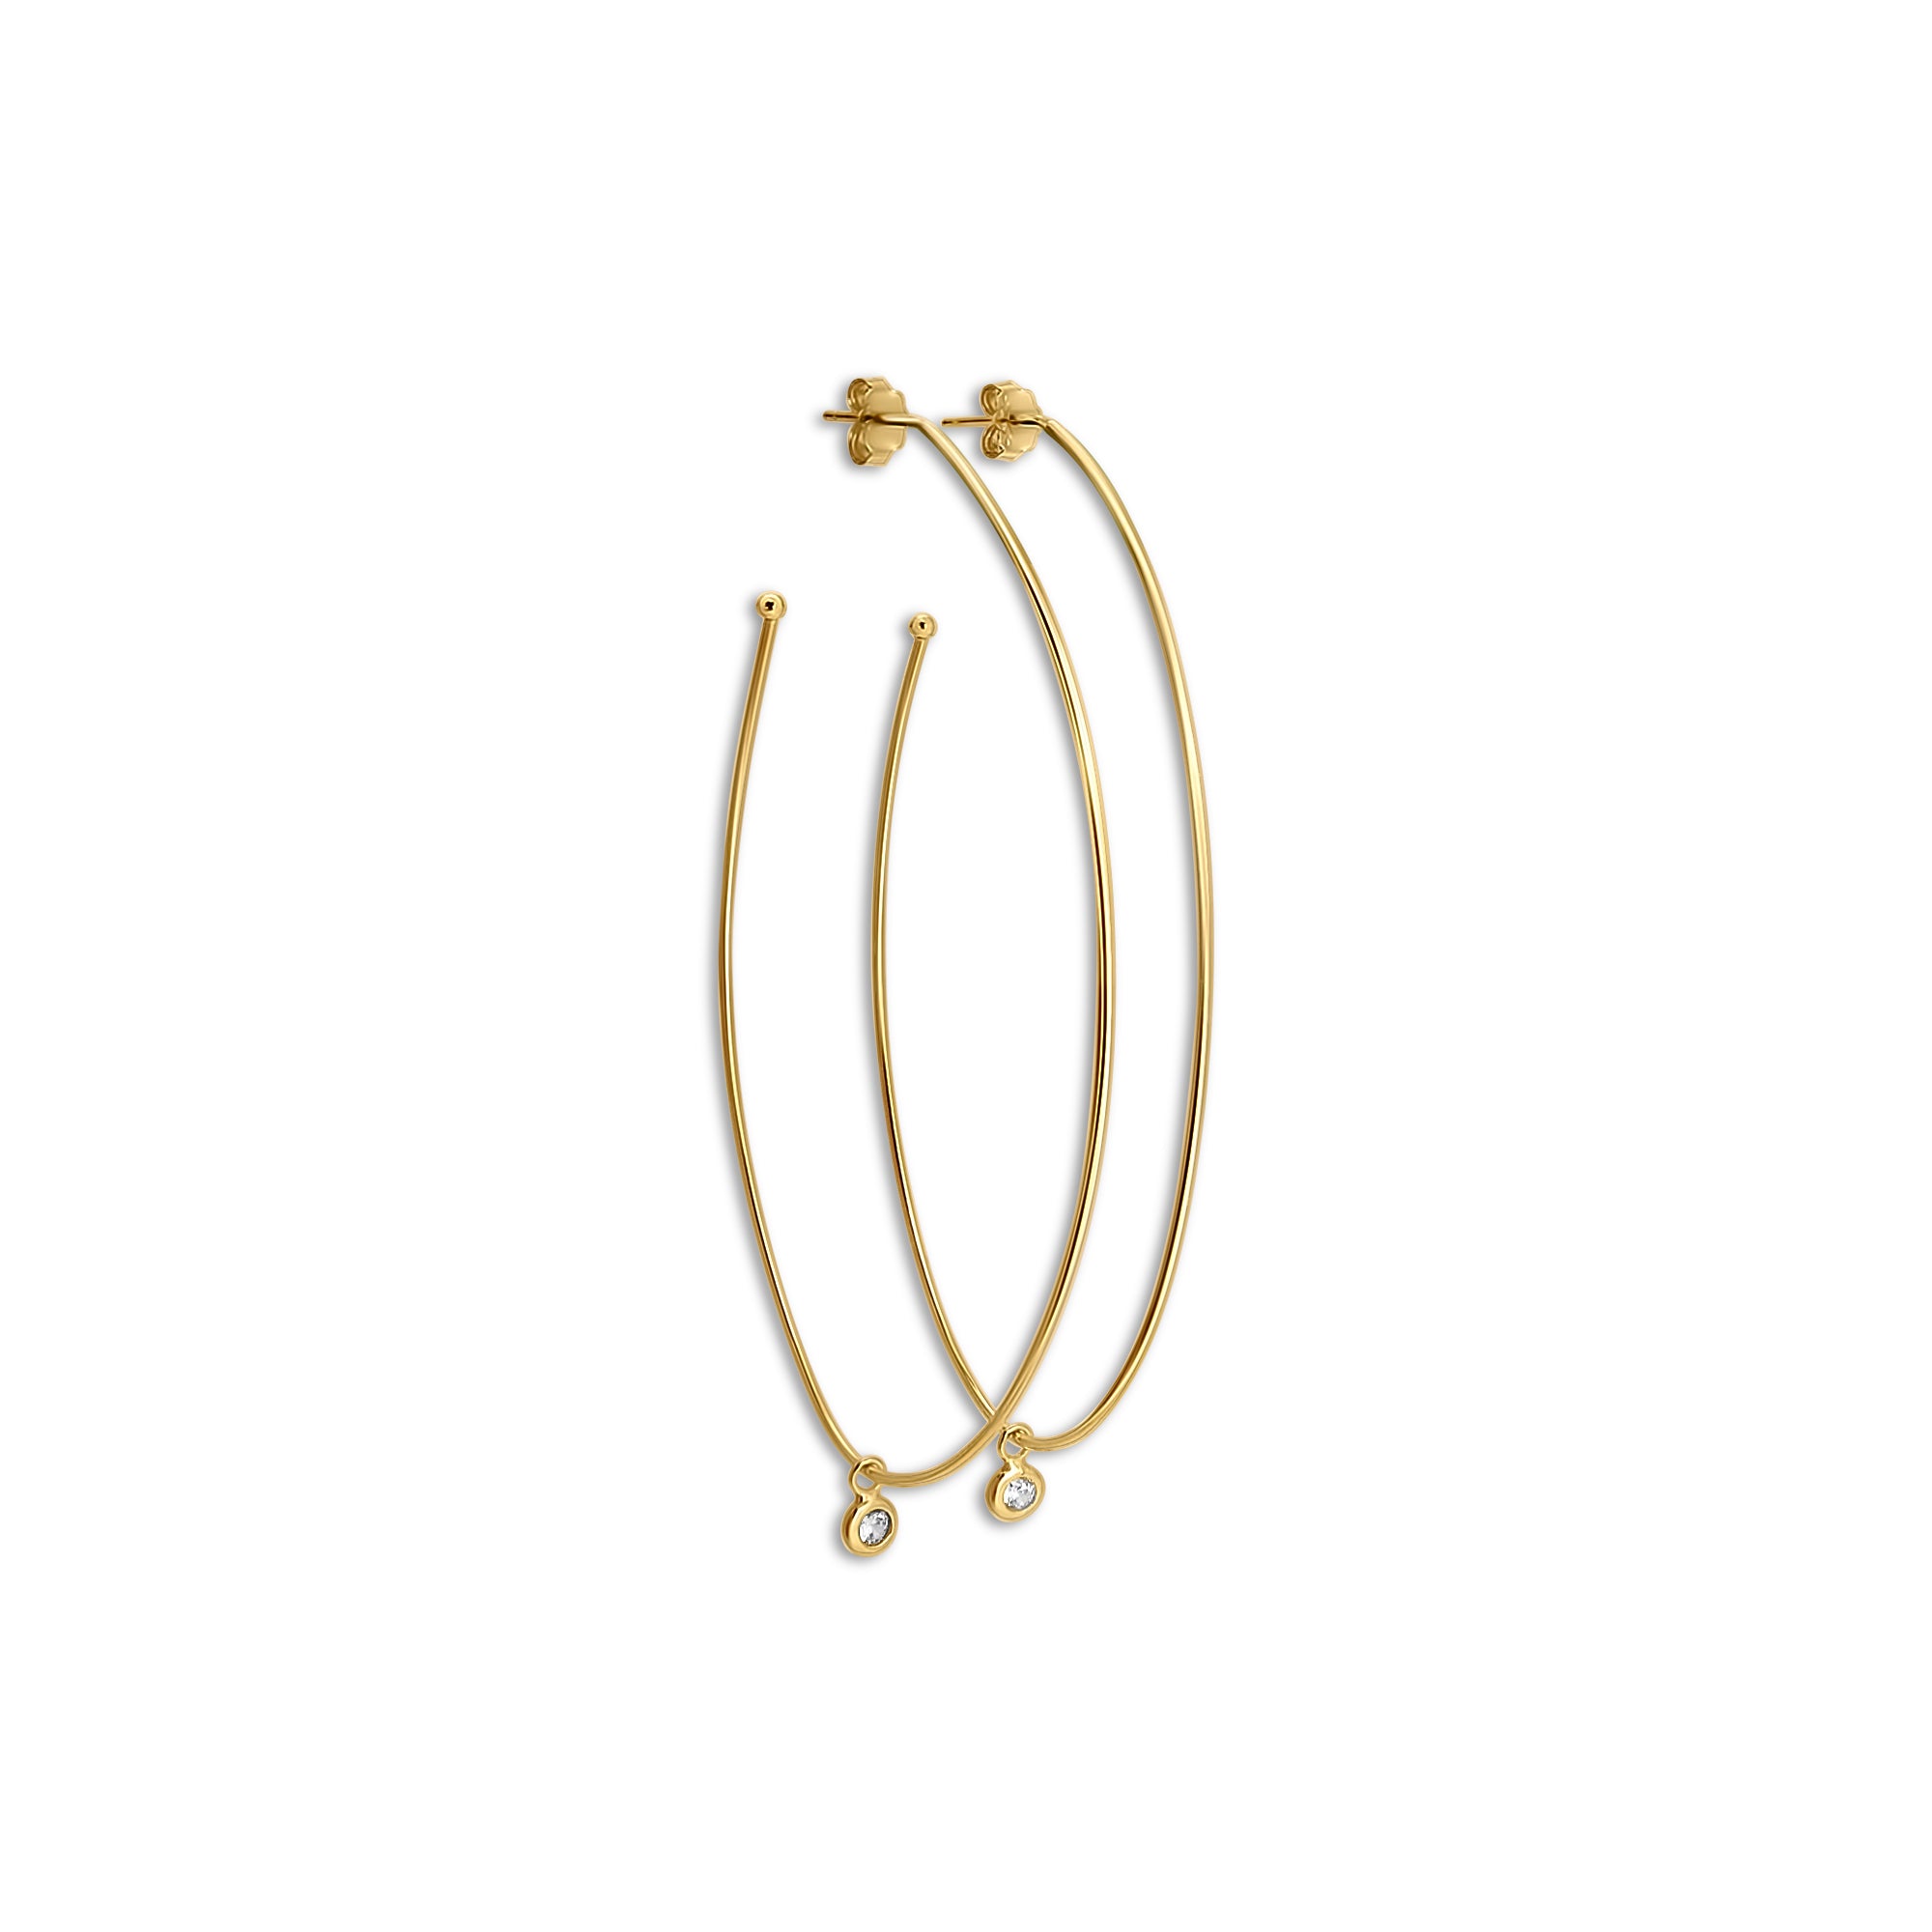 Drippn' Gold Wire Oval Hoops